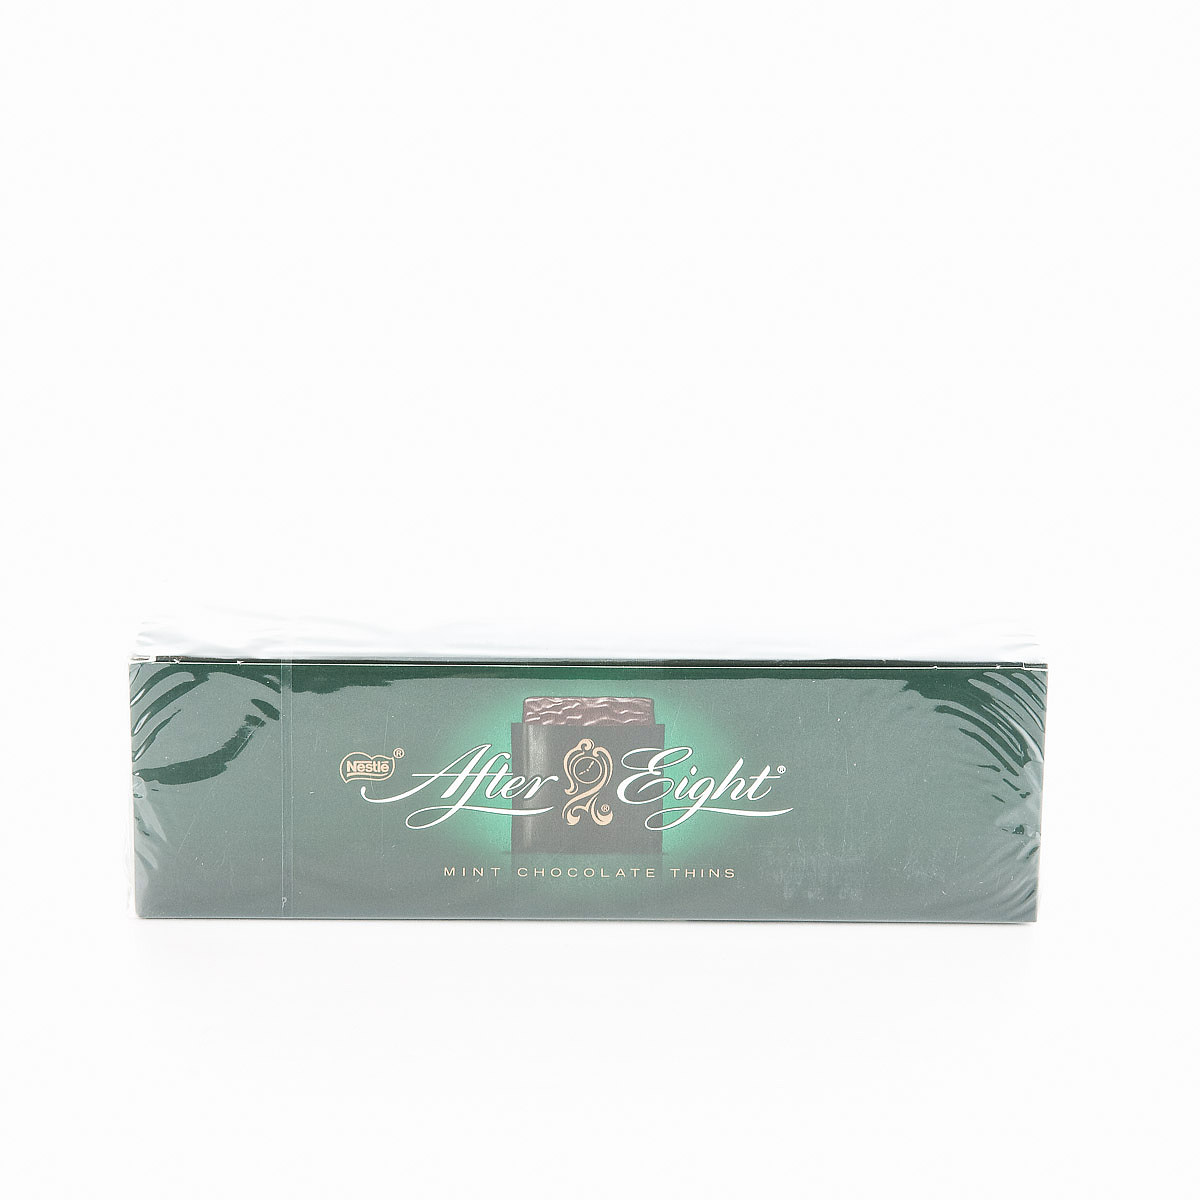 AFTER EIGHT 300G.